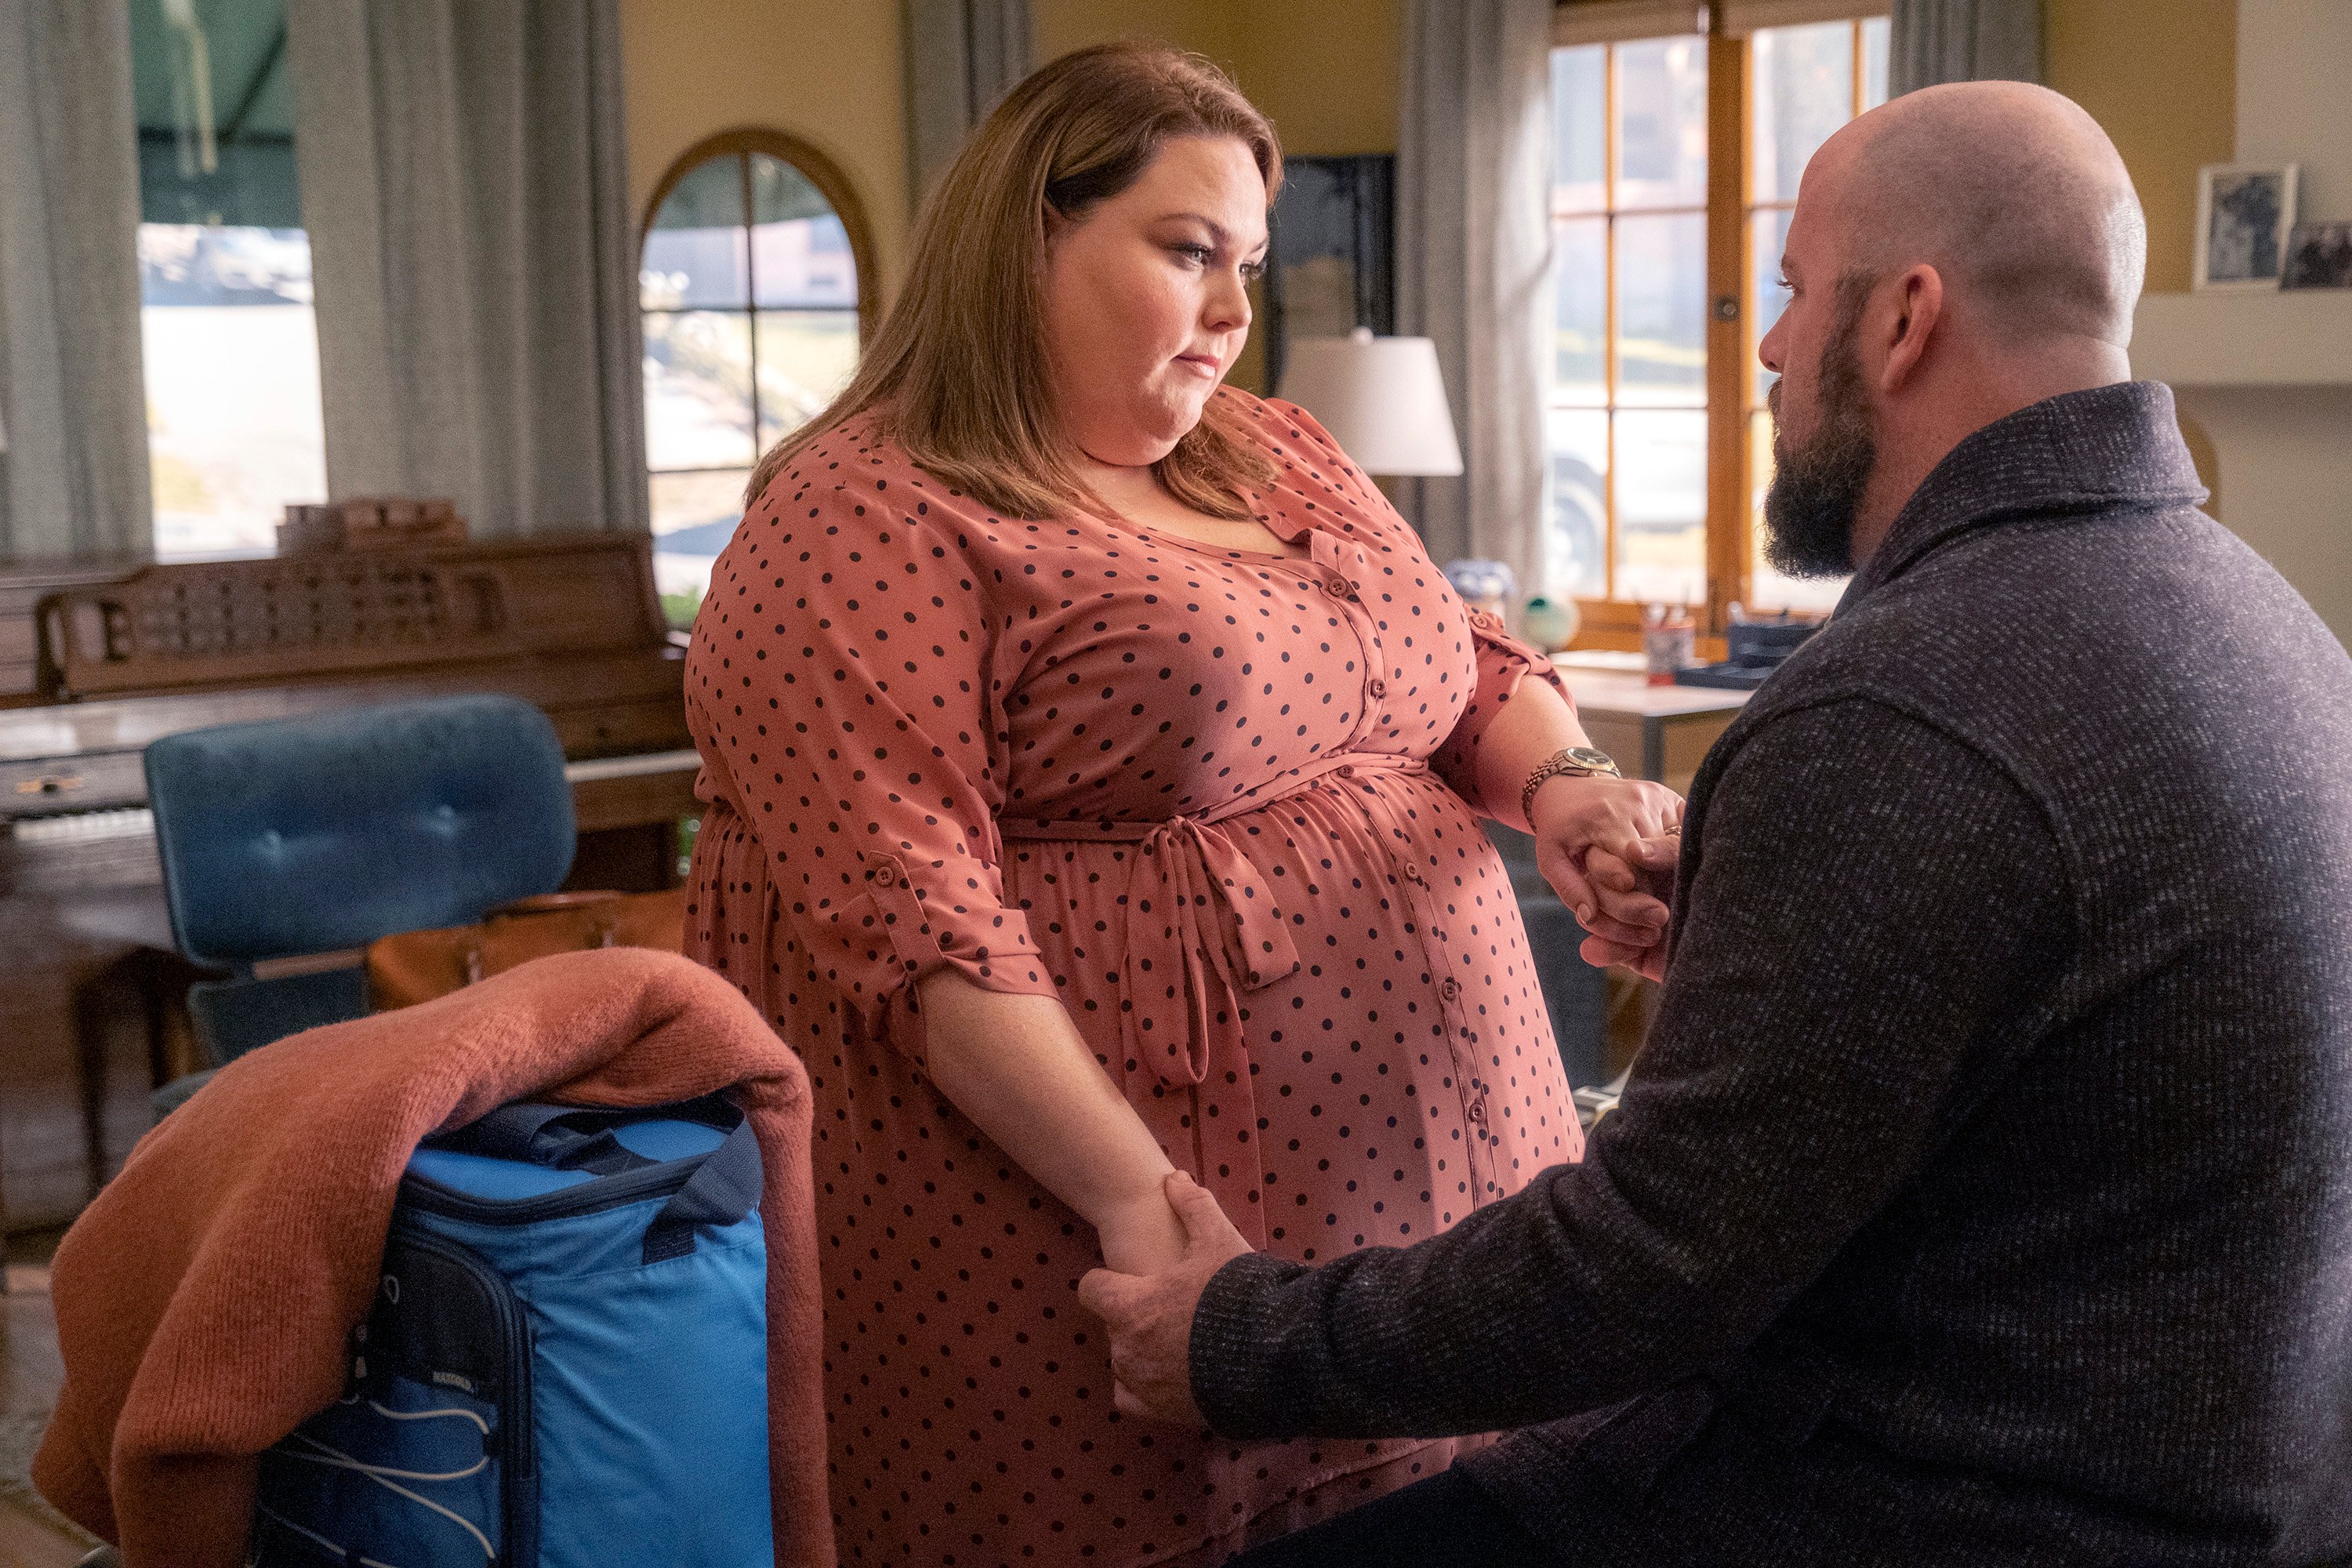 'This Is Us' Season 6 stars Chrissy Metz and Chris Sullivan, in character as Kate and Toby, share a scene. Toby, holding Kate's hands, wears a dark gray sweater. Kate wears a pink dress with black polka dots.